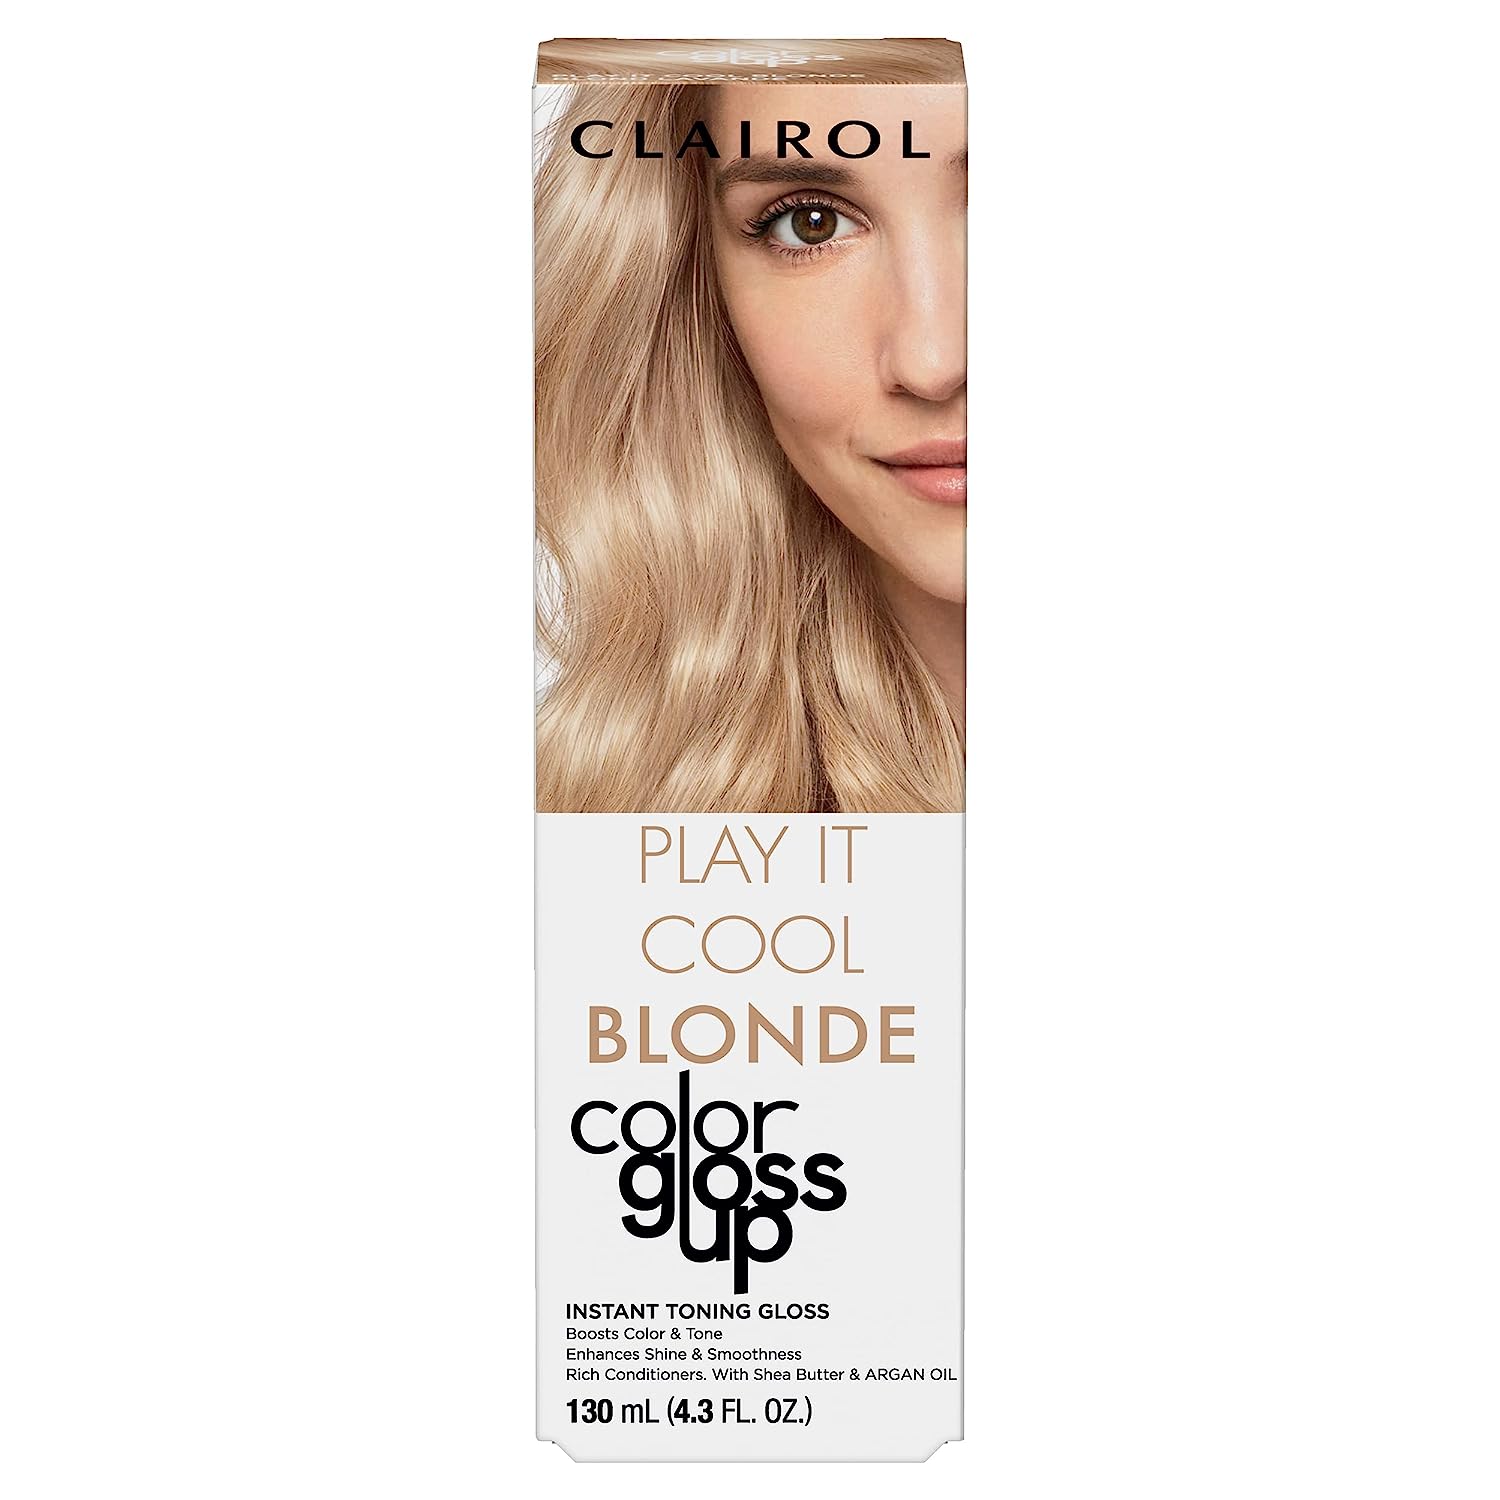 Clairol Color Gloss Up Temporary Hair Dye, Play it [...]